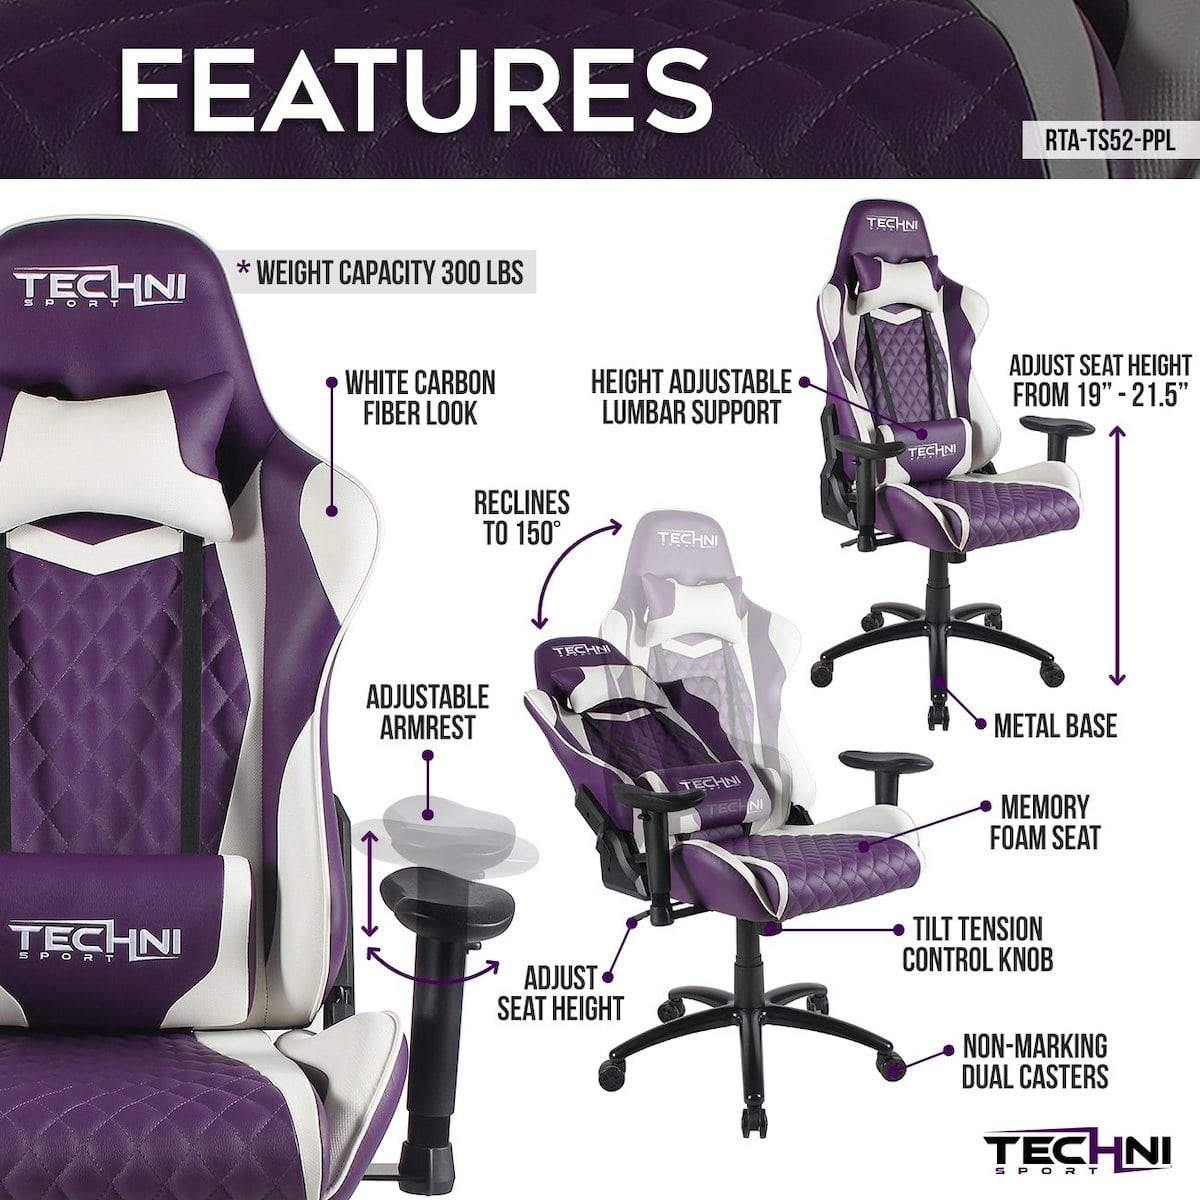 Techni Sport TS-52 Purple Ergonomic High Back Racer Style PC Gaming Chair RTA-TS52-PPL Features